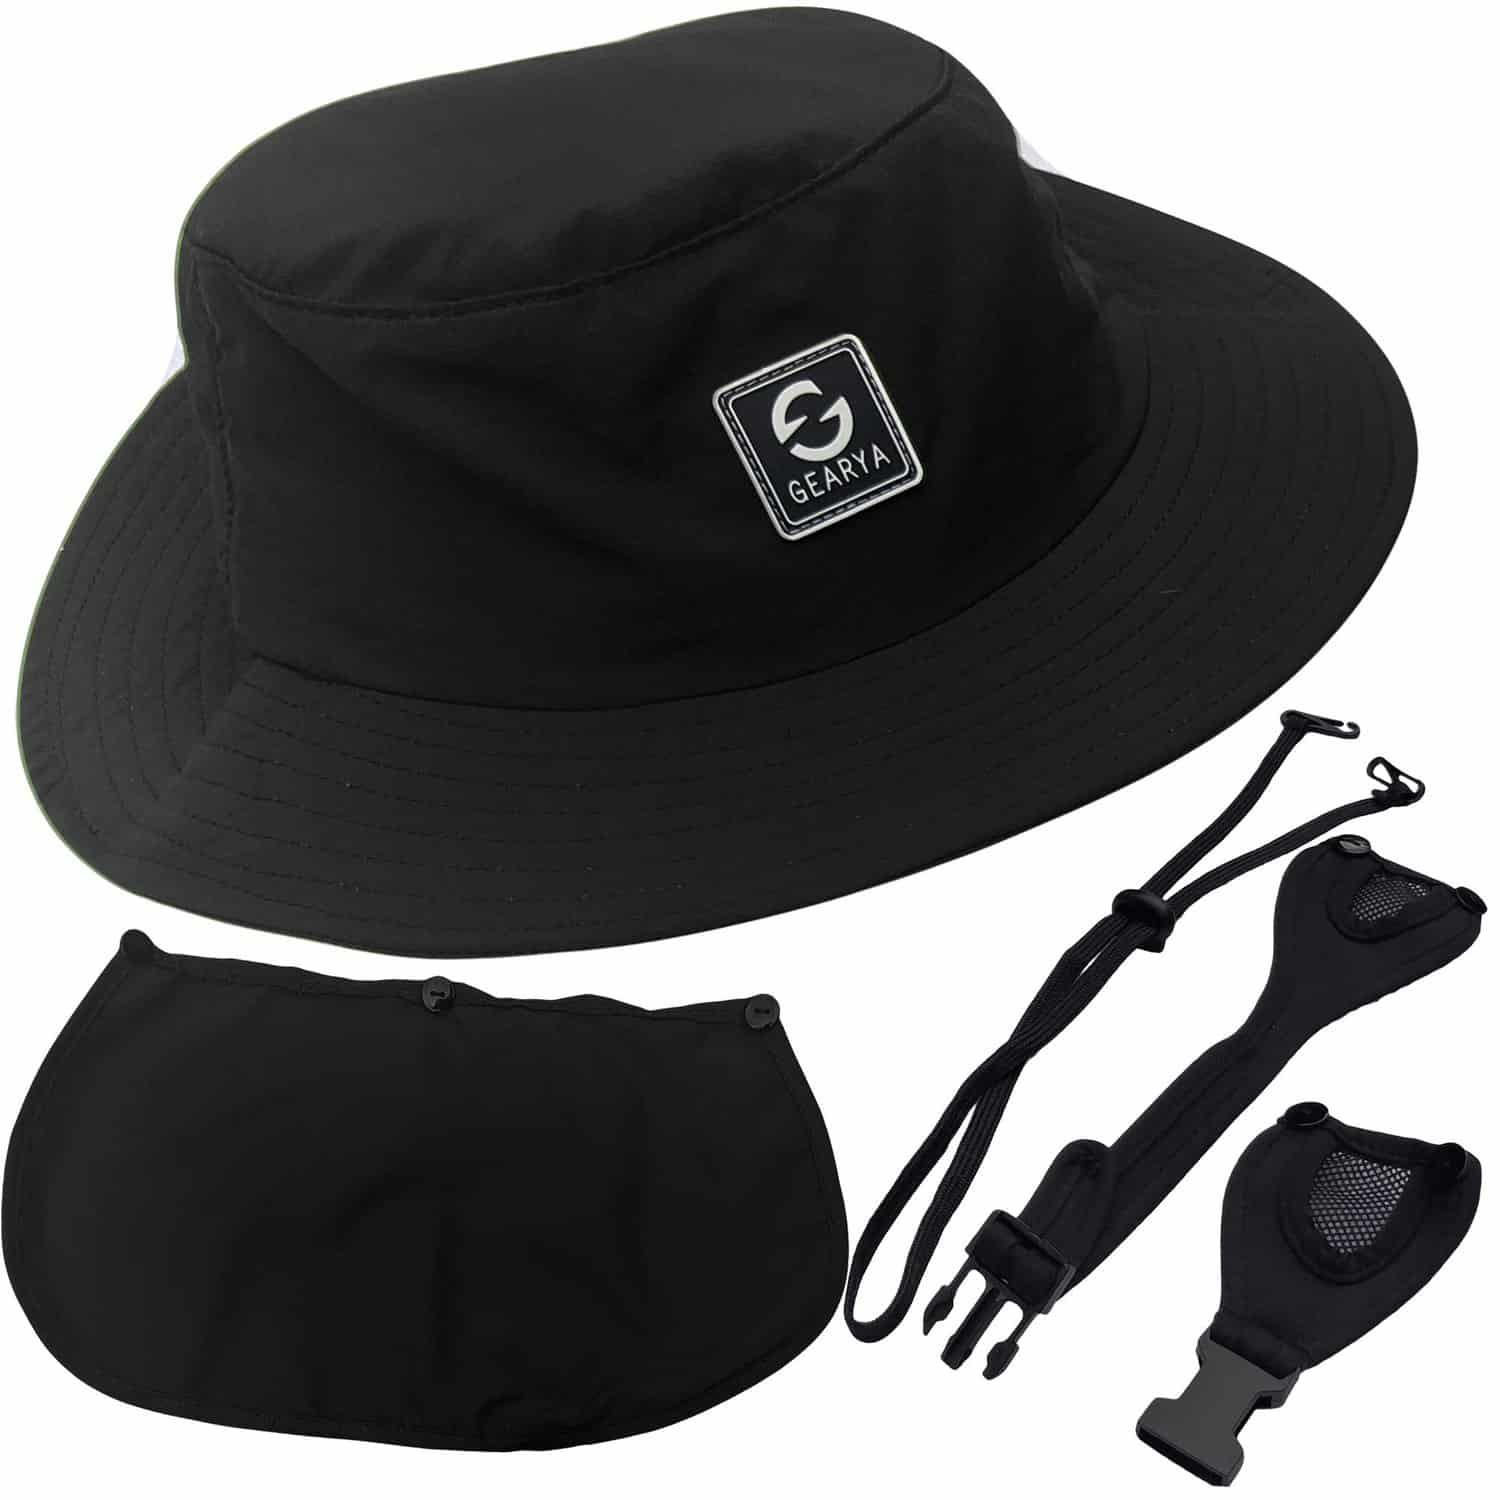 2 Pcs Bucket Hats for Men Women Surf Hat with Chin Straps Sun Hats for  Hiking Surfing Camping Boating Water Sports Black